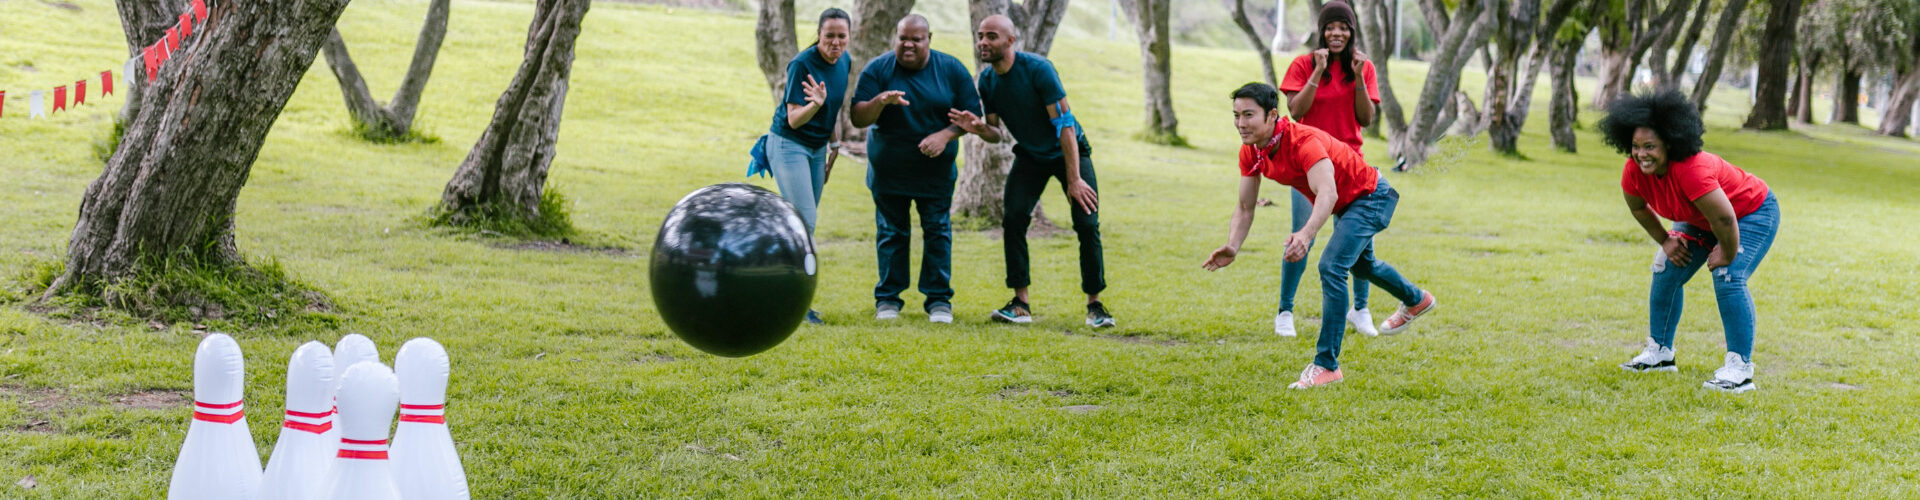 Group of adults playing a lawn bowling game